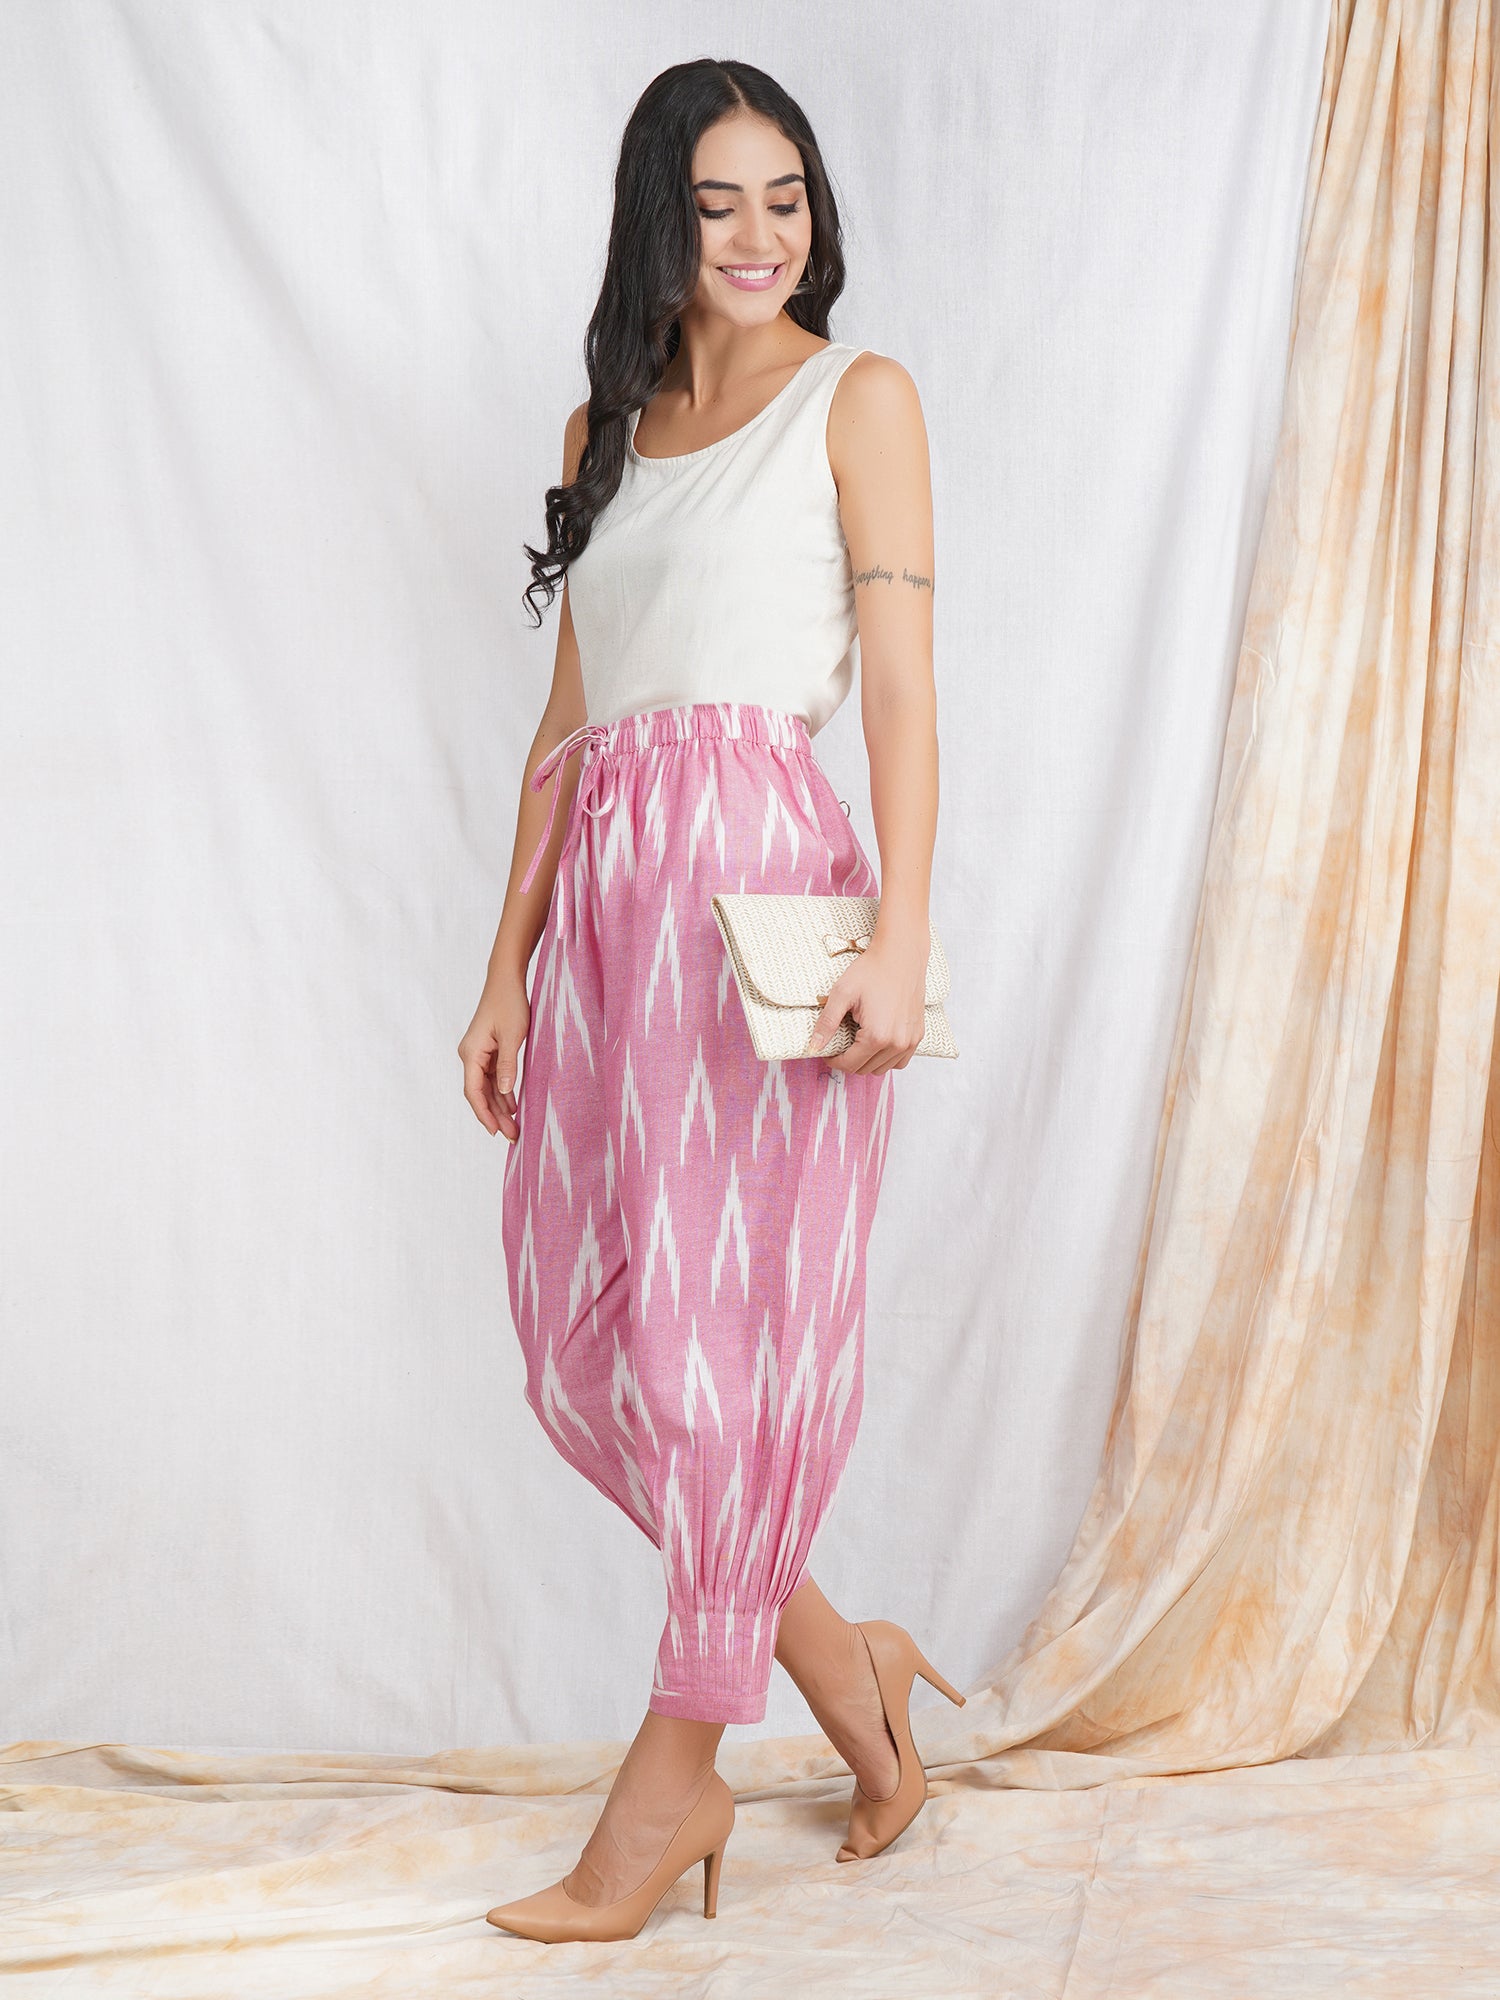 Harems pants for women: Elevate Your Style缩略图